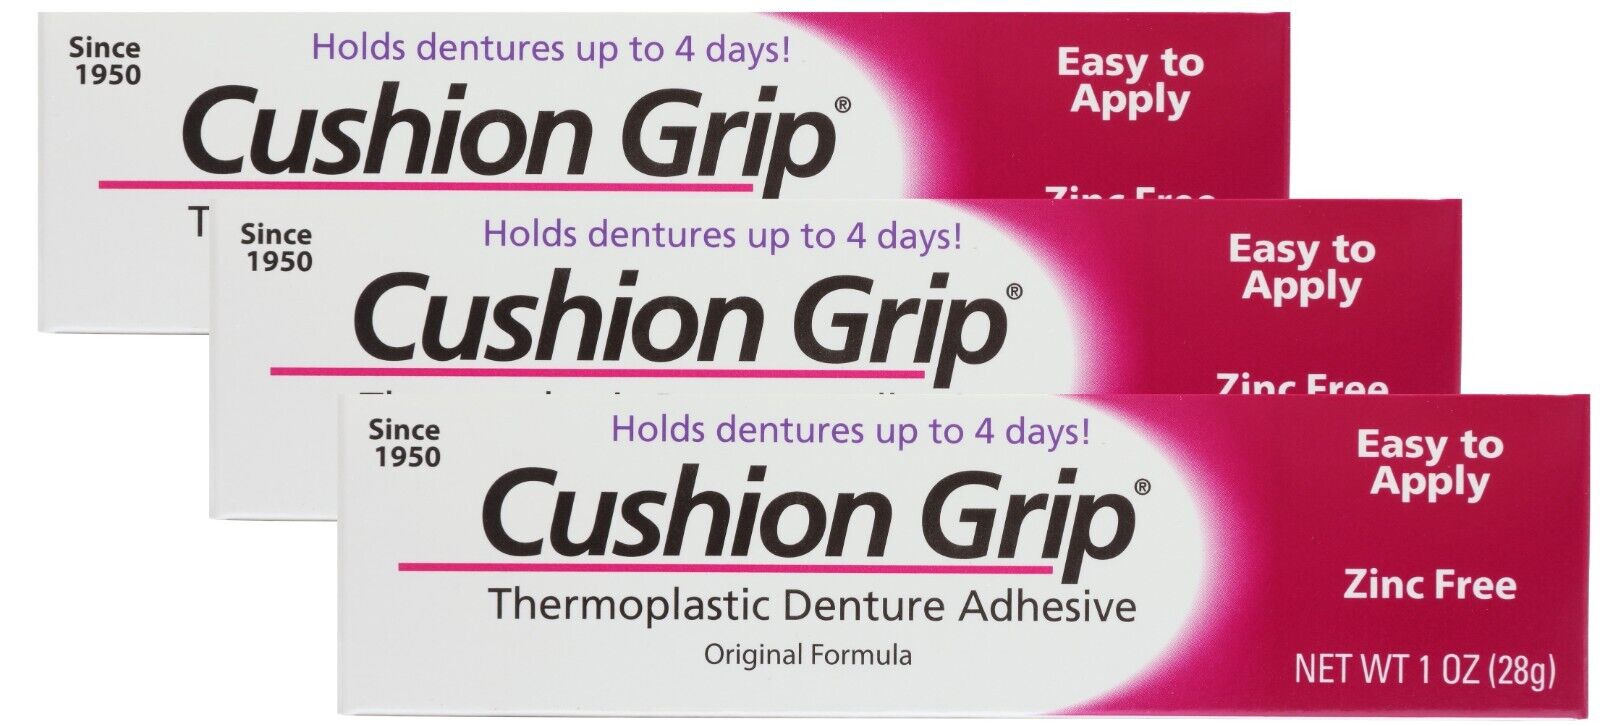 Cushion Grip Thermoplastic Denture Adhesive 1 Oz 3-Pack [Acts Like Soft Reline ] Cushion Grip GH-WOV7-7YZ6